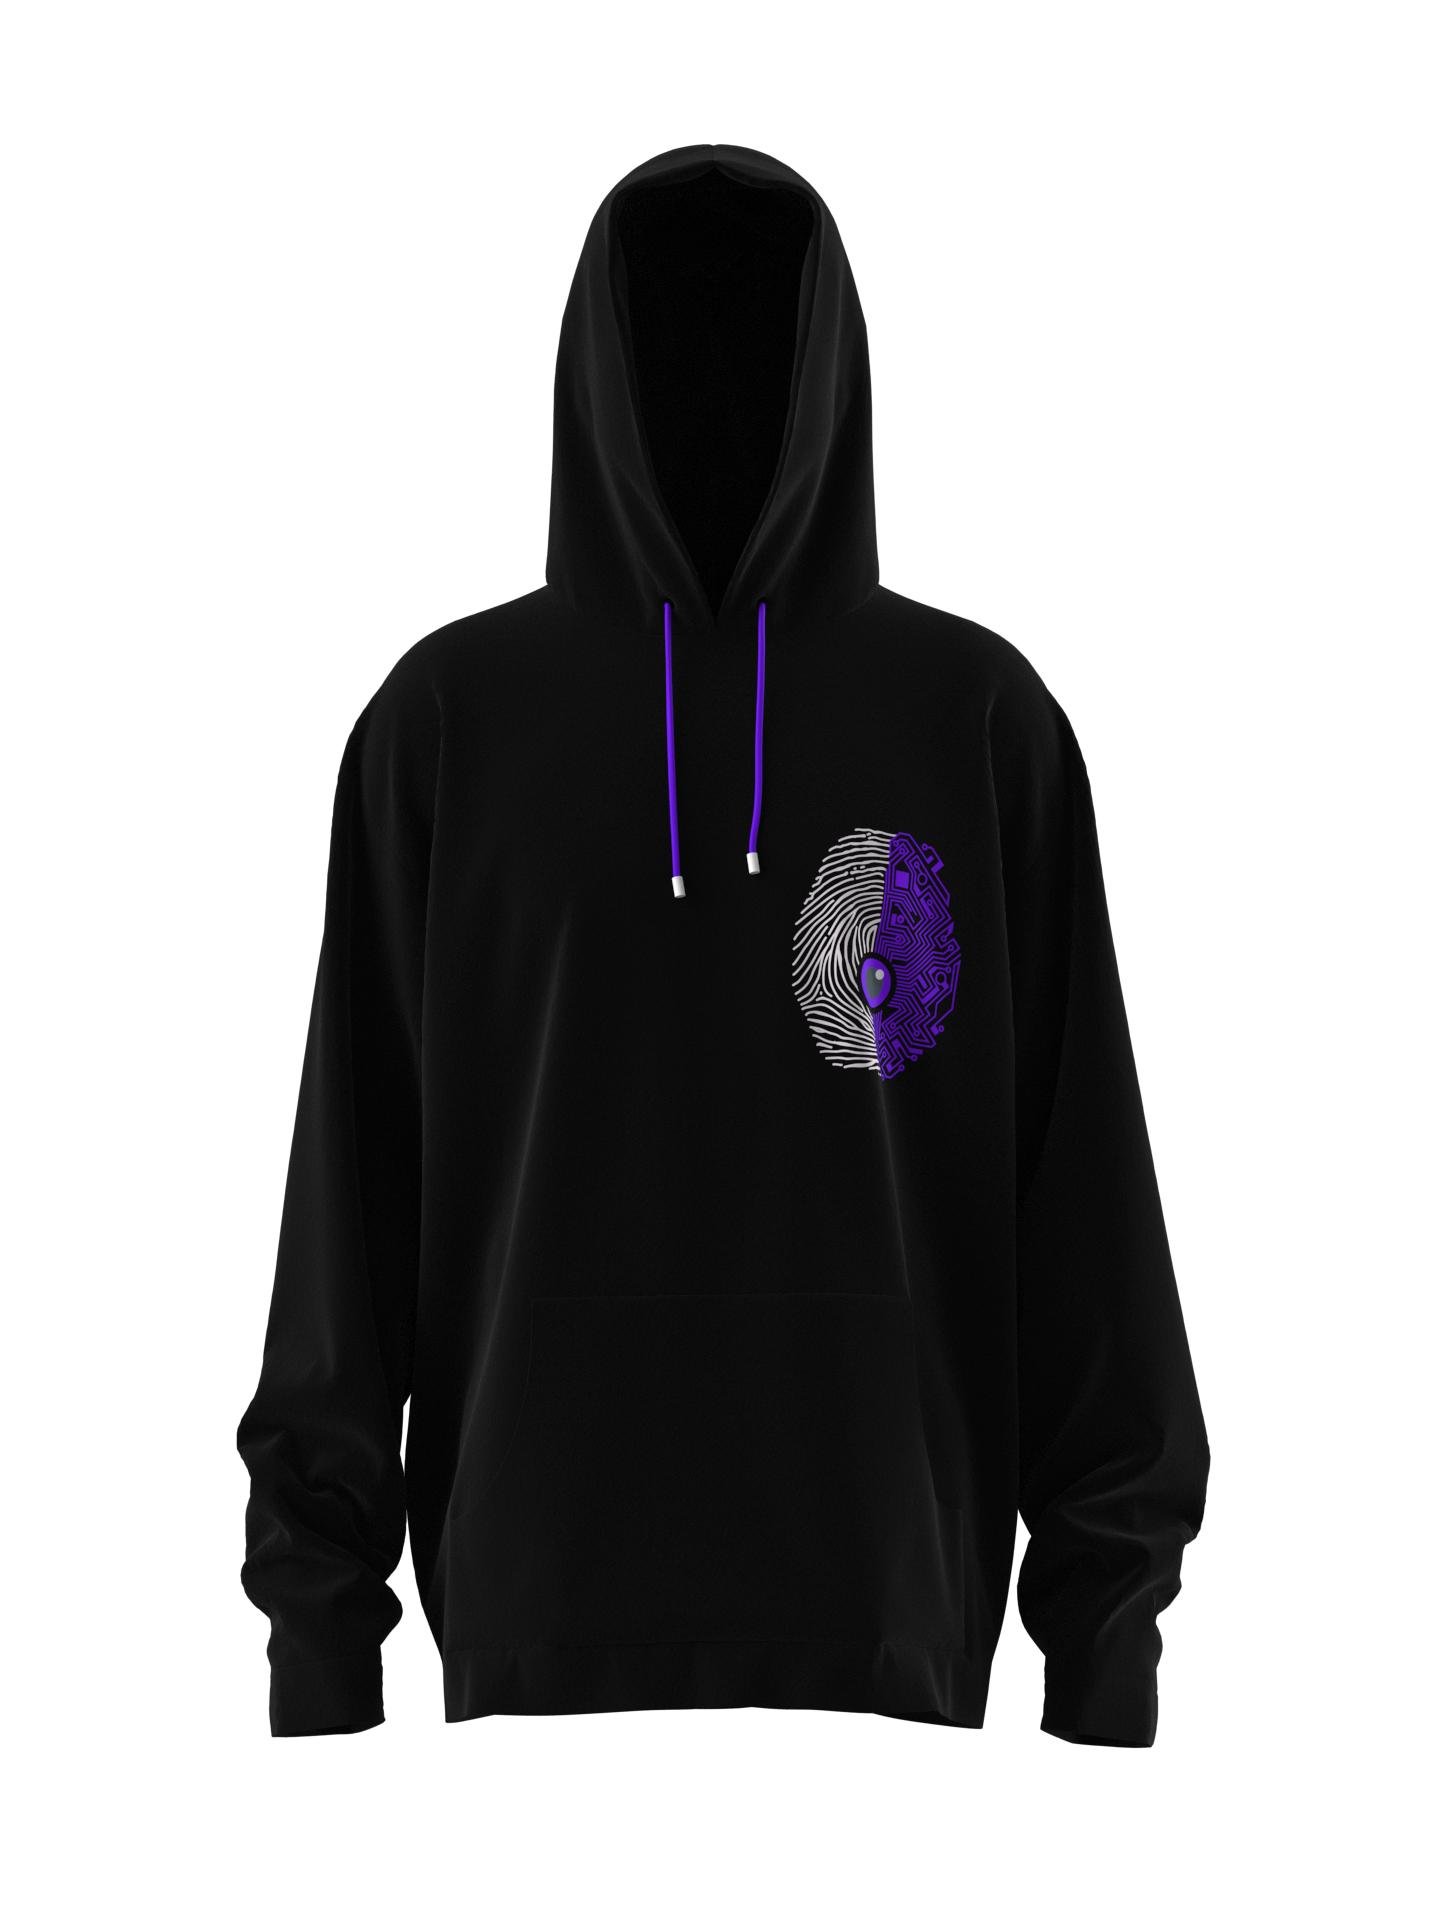 Spine or Technology? Purple Hoodie by NATTY GARB